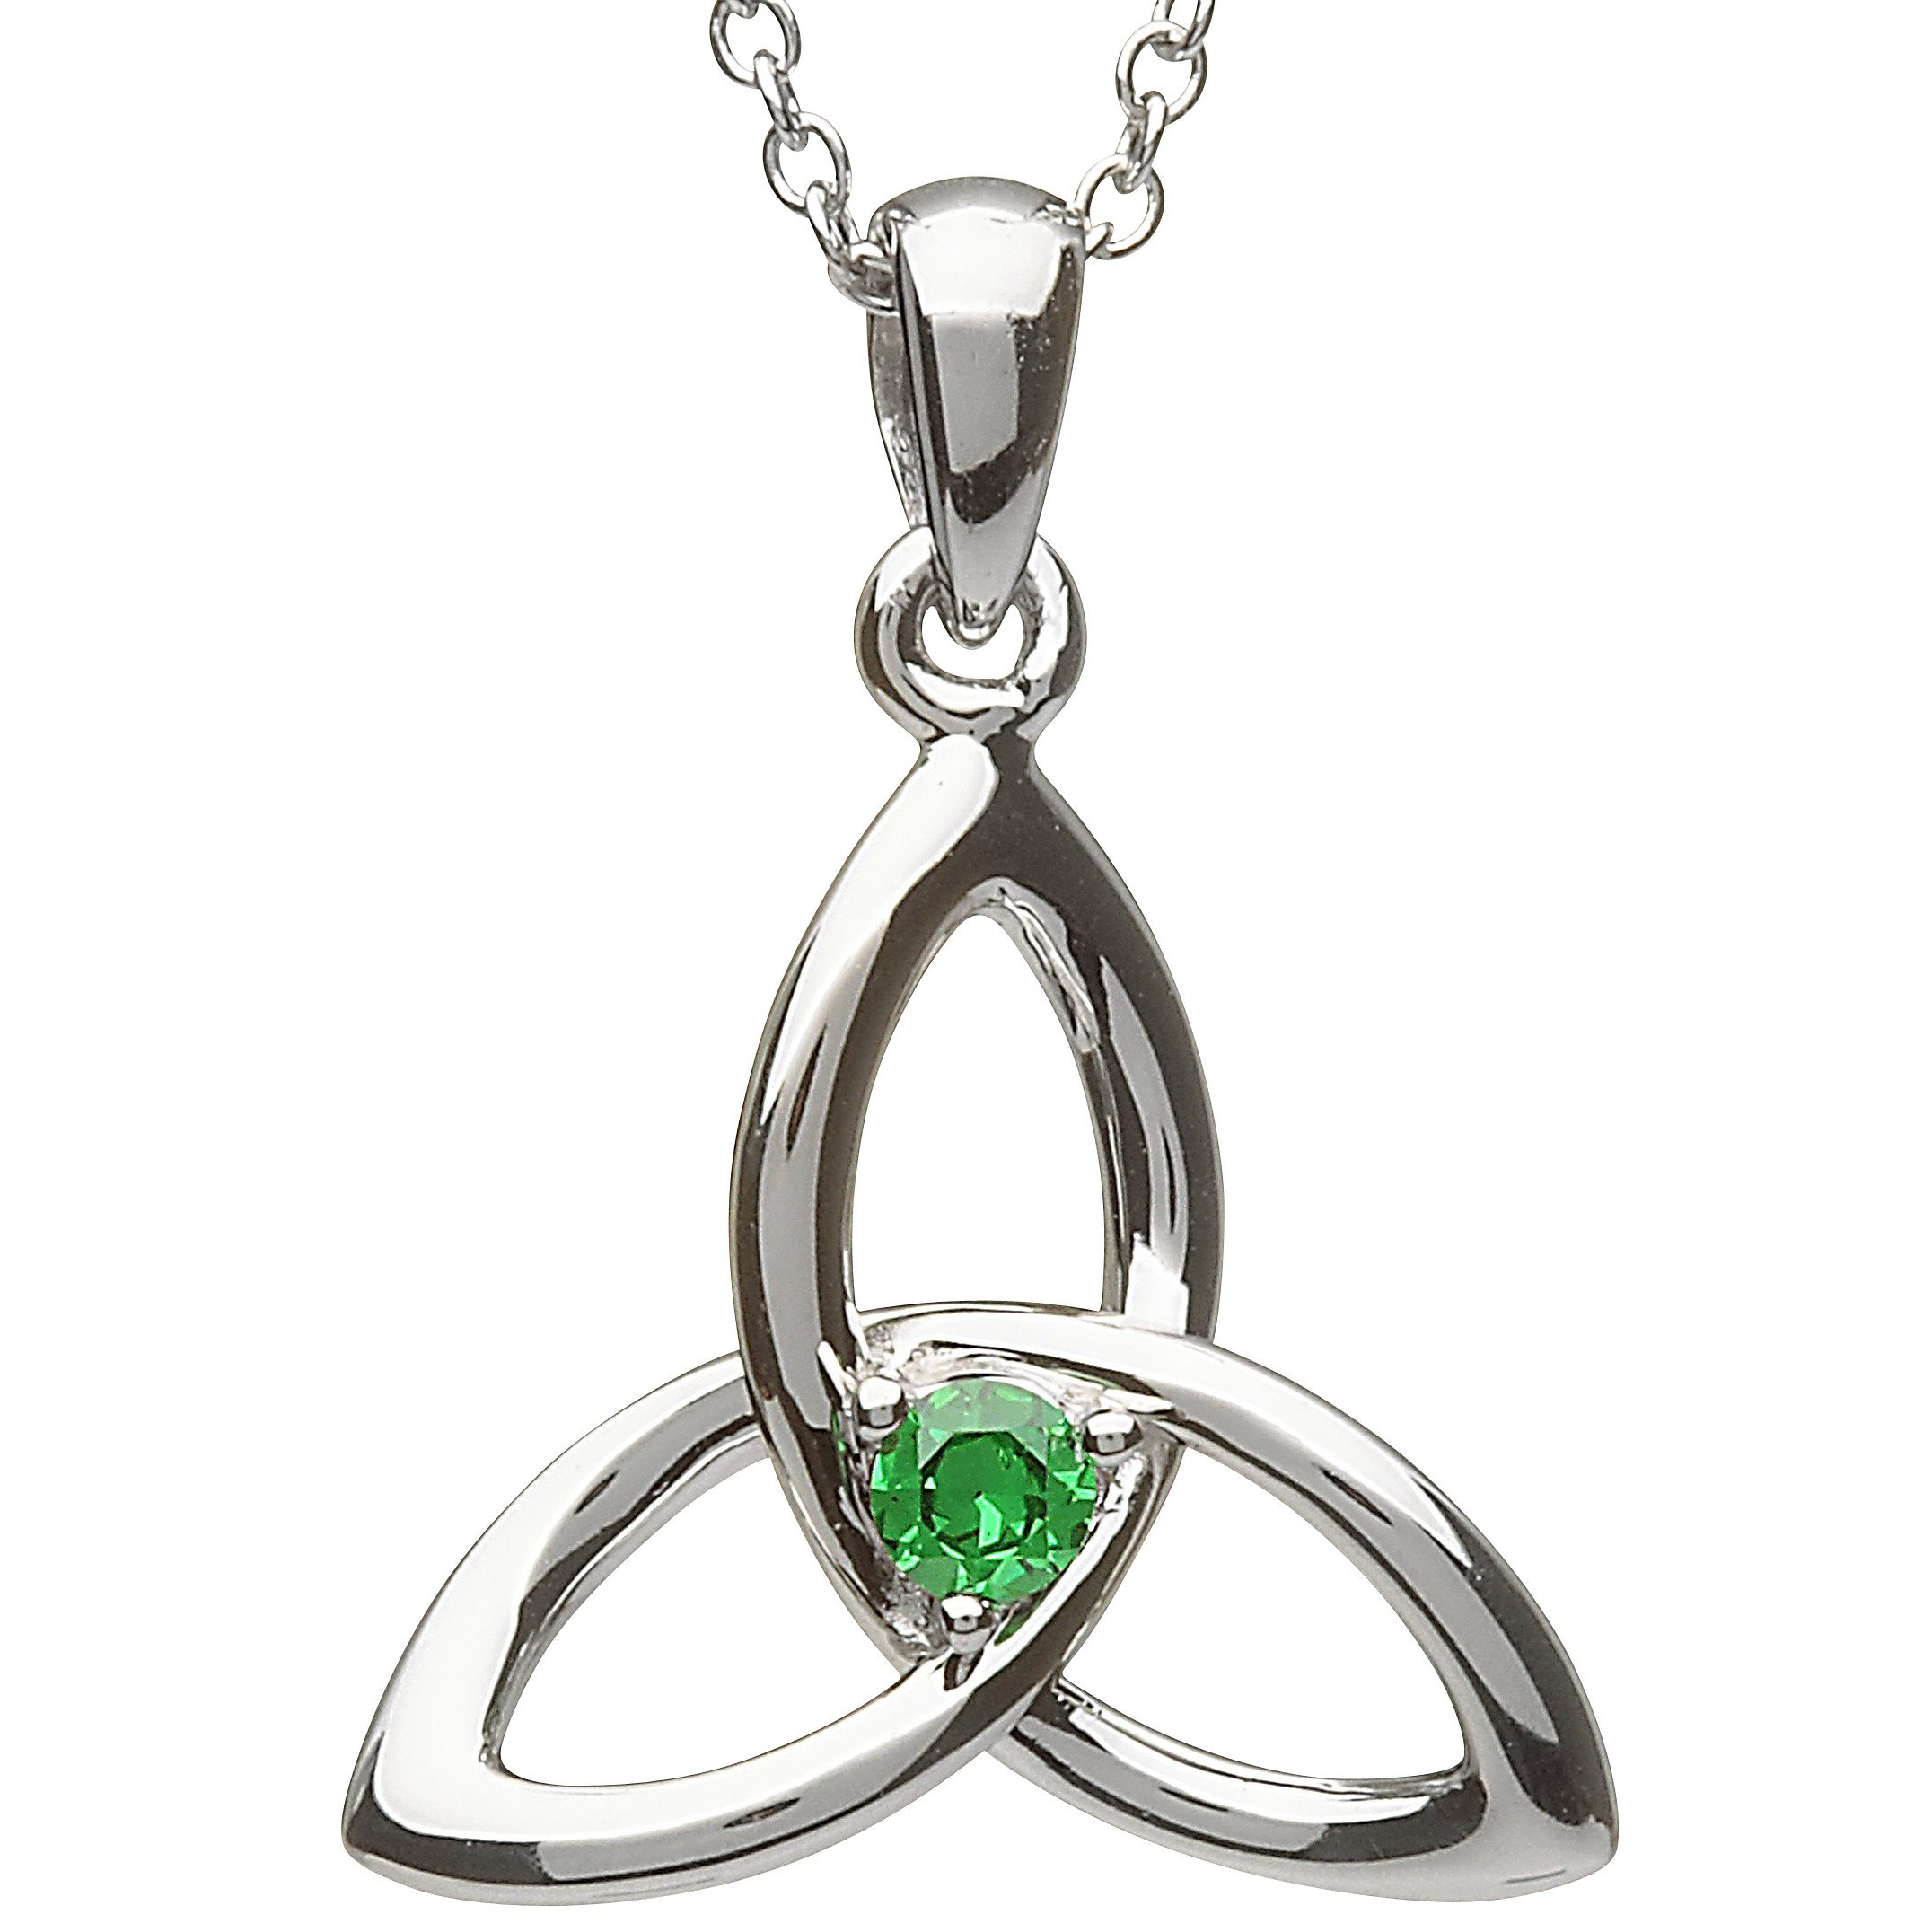 Product image for Trinity Knot Pendant - Sterling Silver Celtic Trinity Knot with Green Stone Pendant with Chain